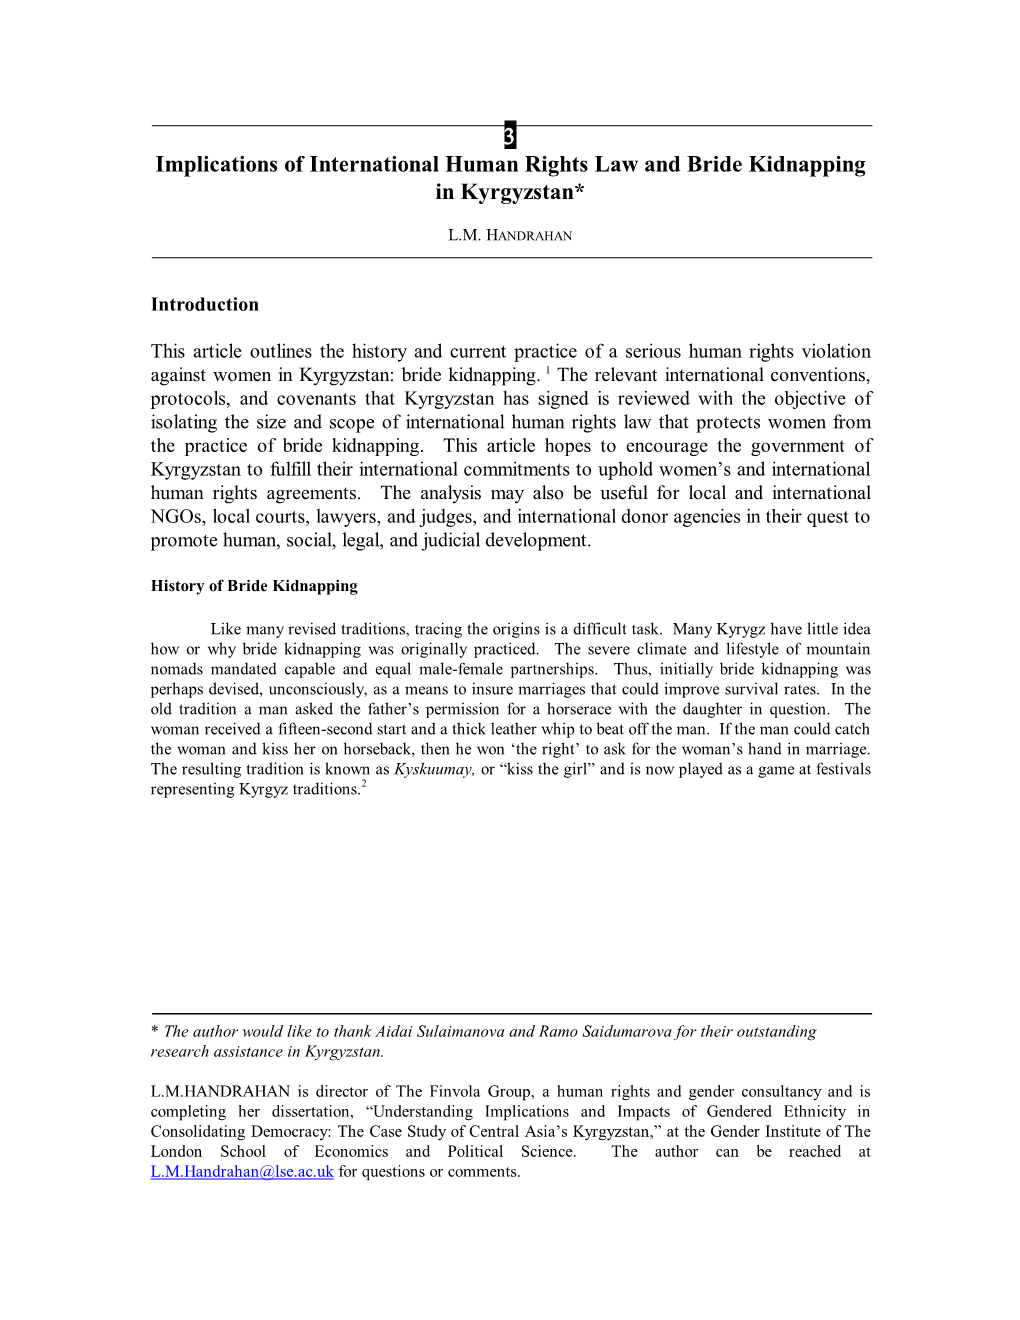 3 Implications of International Human Rights Law and Bride Kidnapping in Kyrgyzstan*